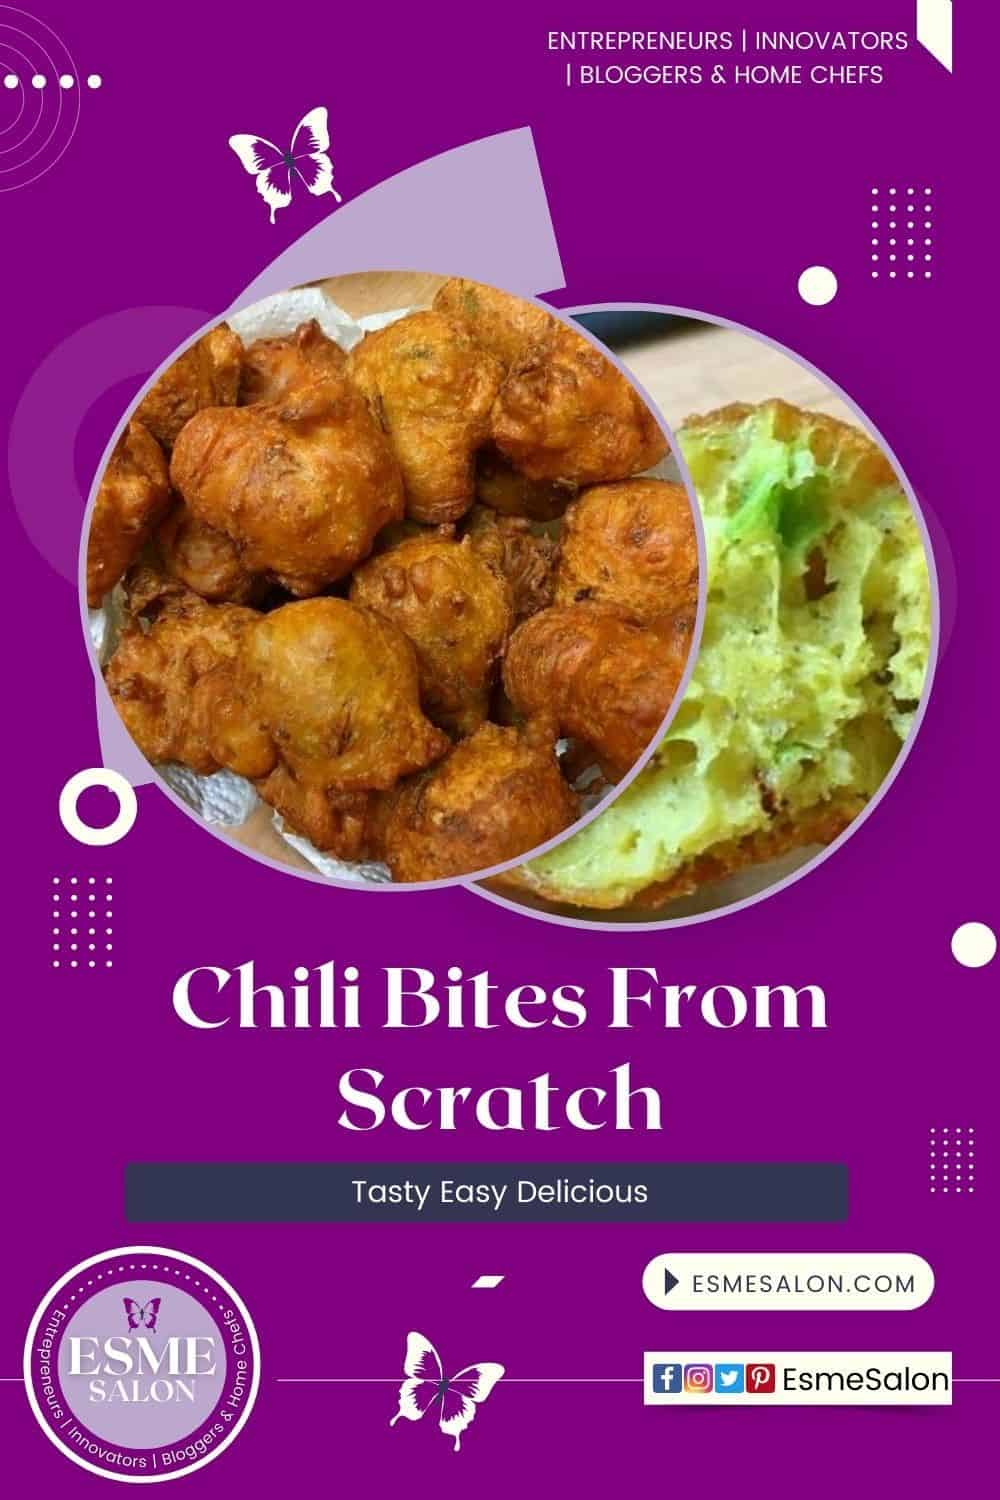 An image of a bowl of Chili Bites From Scratch